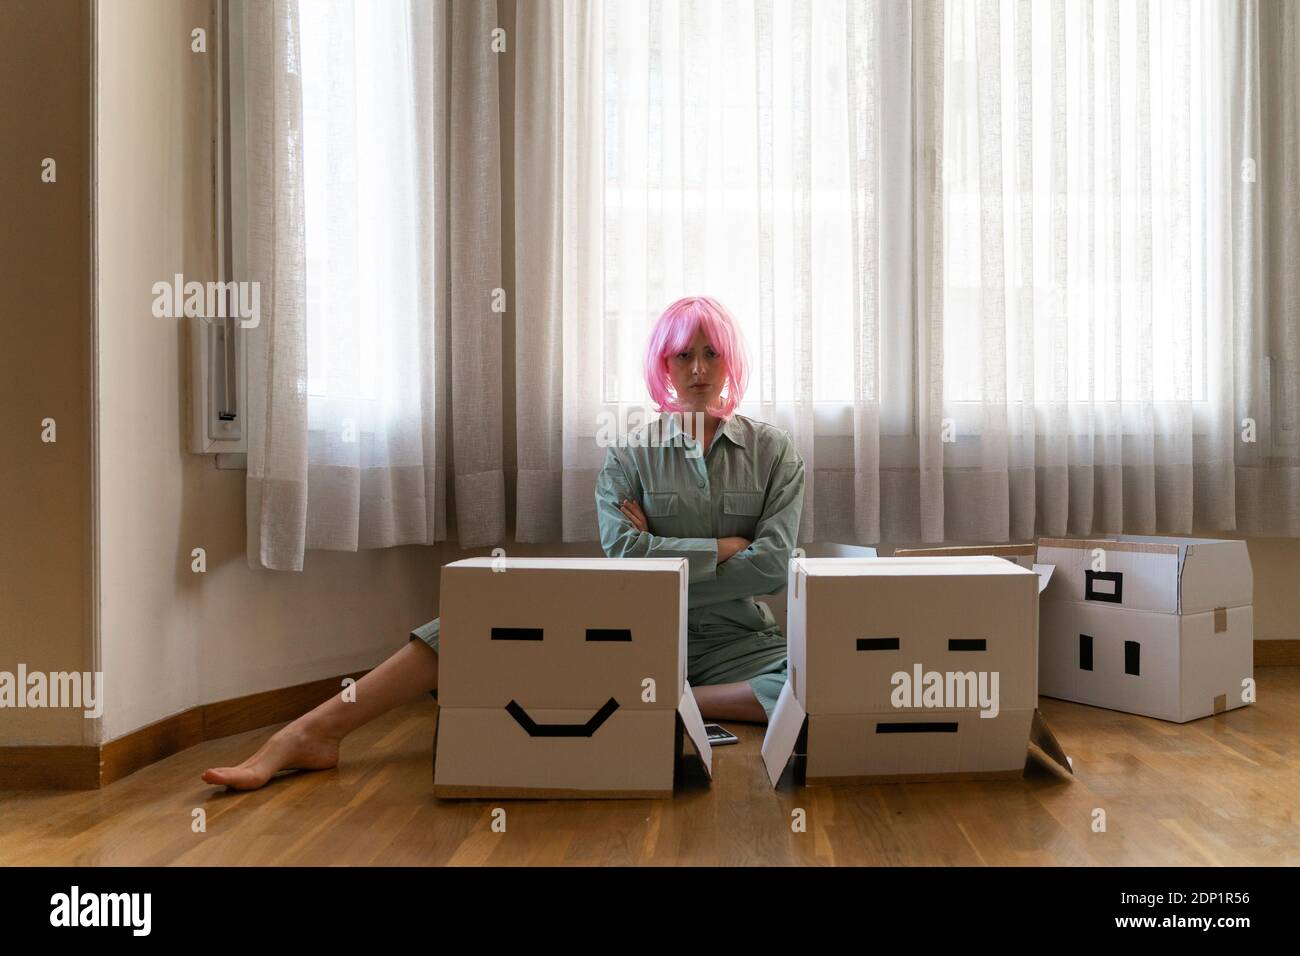 Serious young woman wearing pink wig sitting on the floor with smiley and frowning face cardboard box Stock Photo